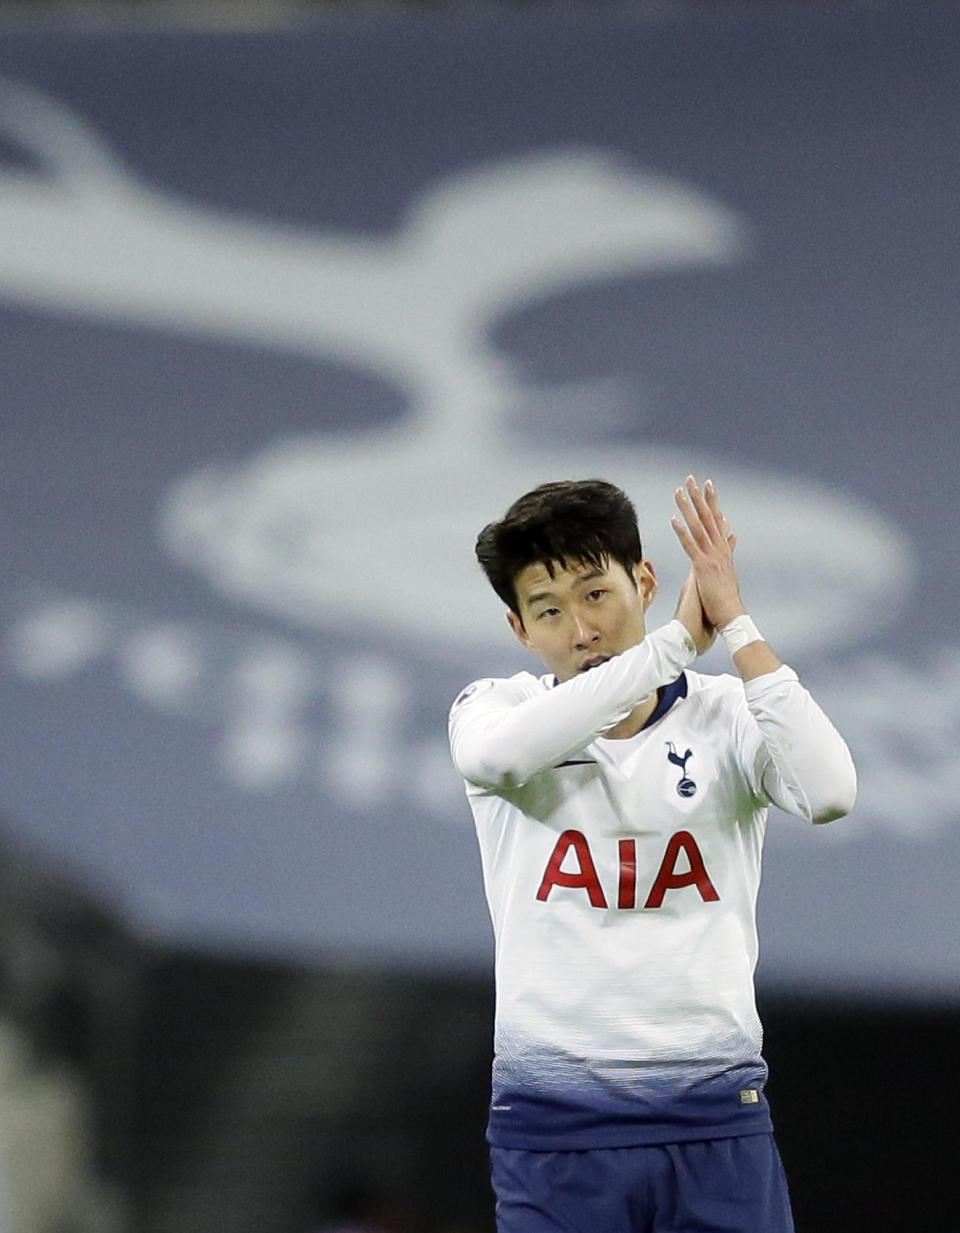 Tottenham's Heung-Min Son applauds to supporters during the English Premier League soccer match between Tottenham Hotspur and Bournemouth at Wembley stadium in London, Wednesday, Dec. 26, 2018. (AP Photo/Tim Ireland)